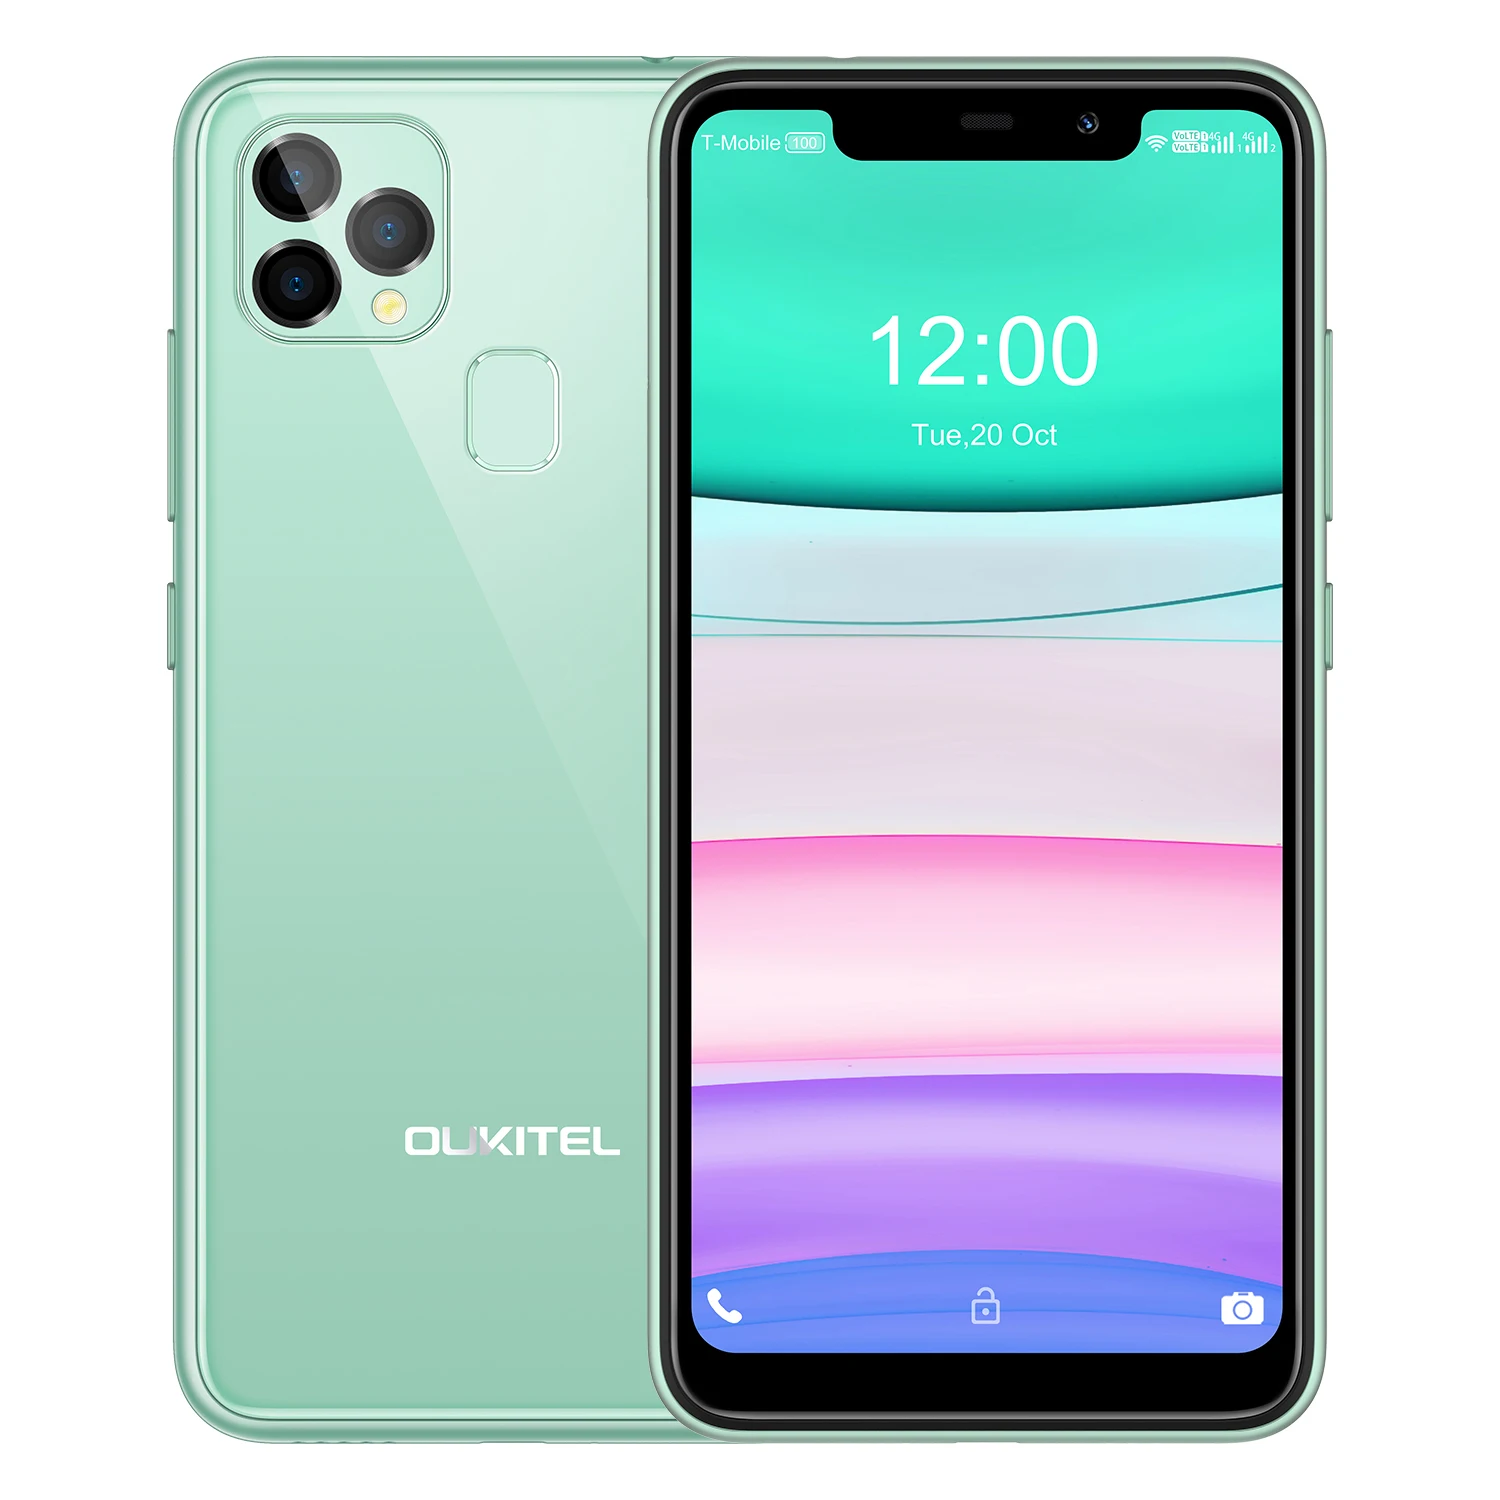 

Cheap mobile 4GB + 128GB high capacity smartphone oukitel C22 5.86 inch 13mp three camera Android 10.0 4G mobile phone, Green,black